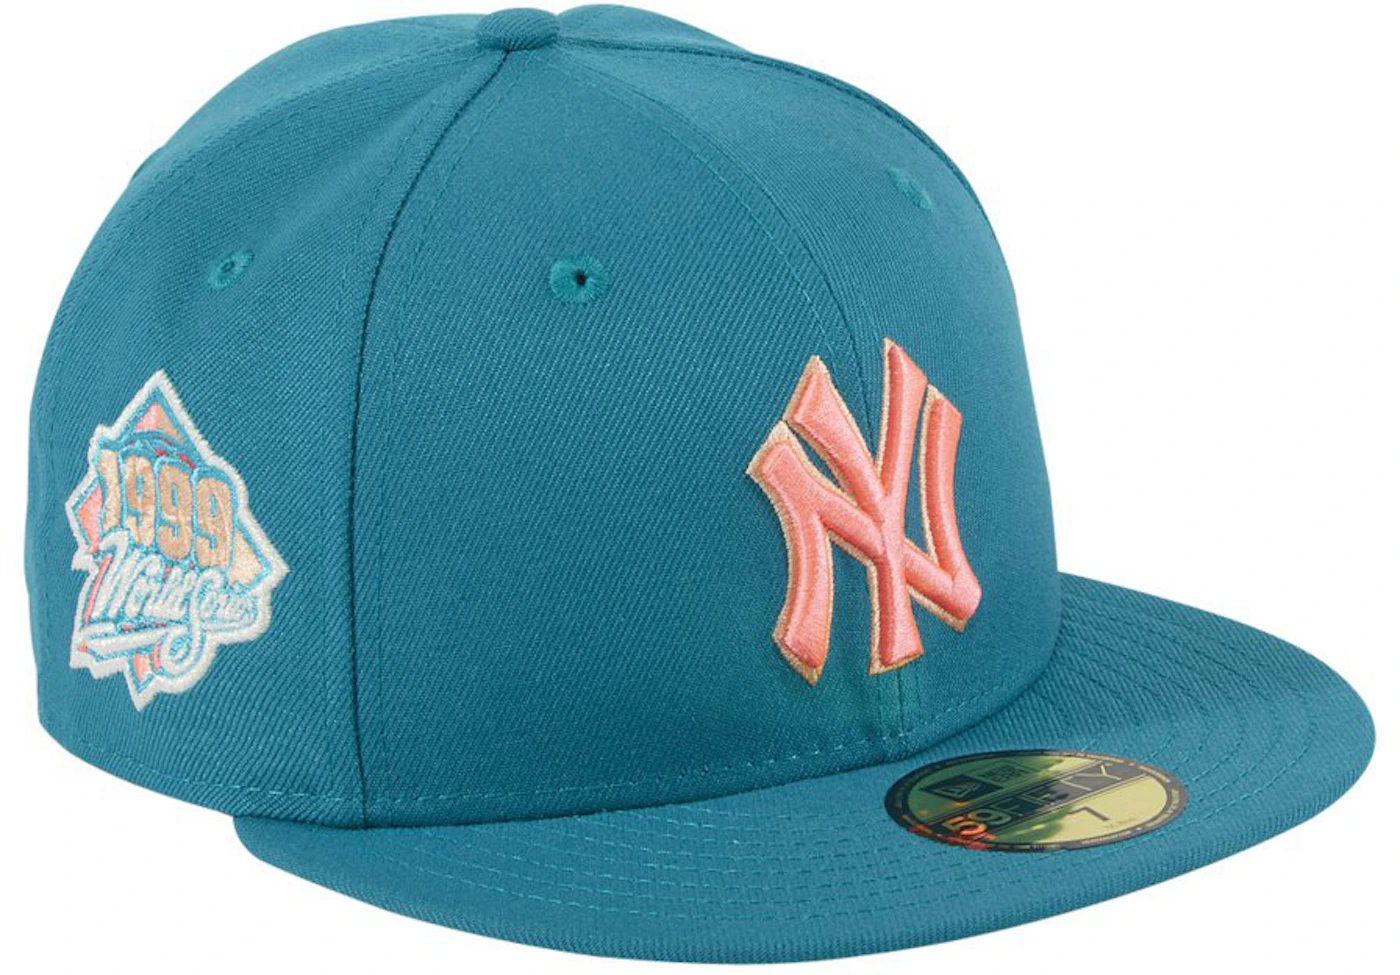 Awake MLB Subway Series 2021 59Fifty Fitted Cap Collection by